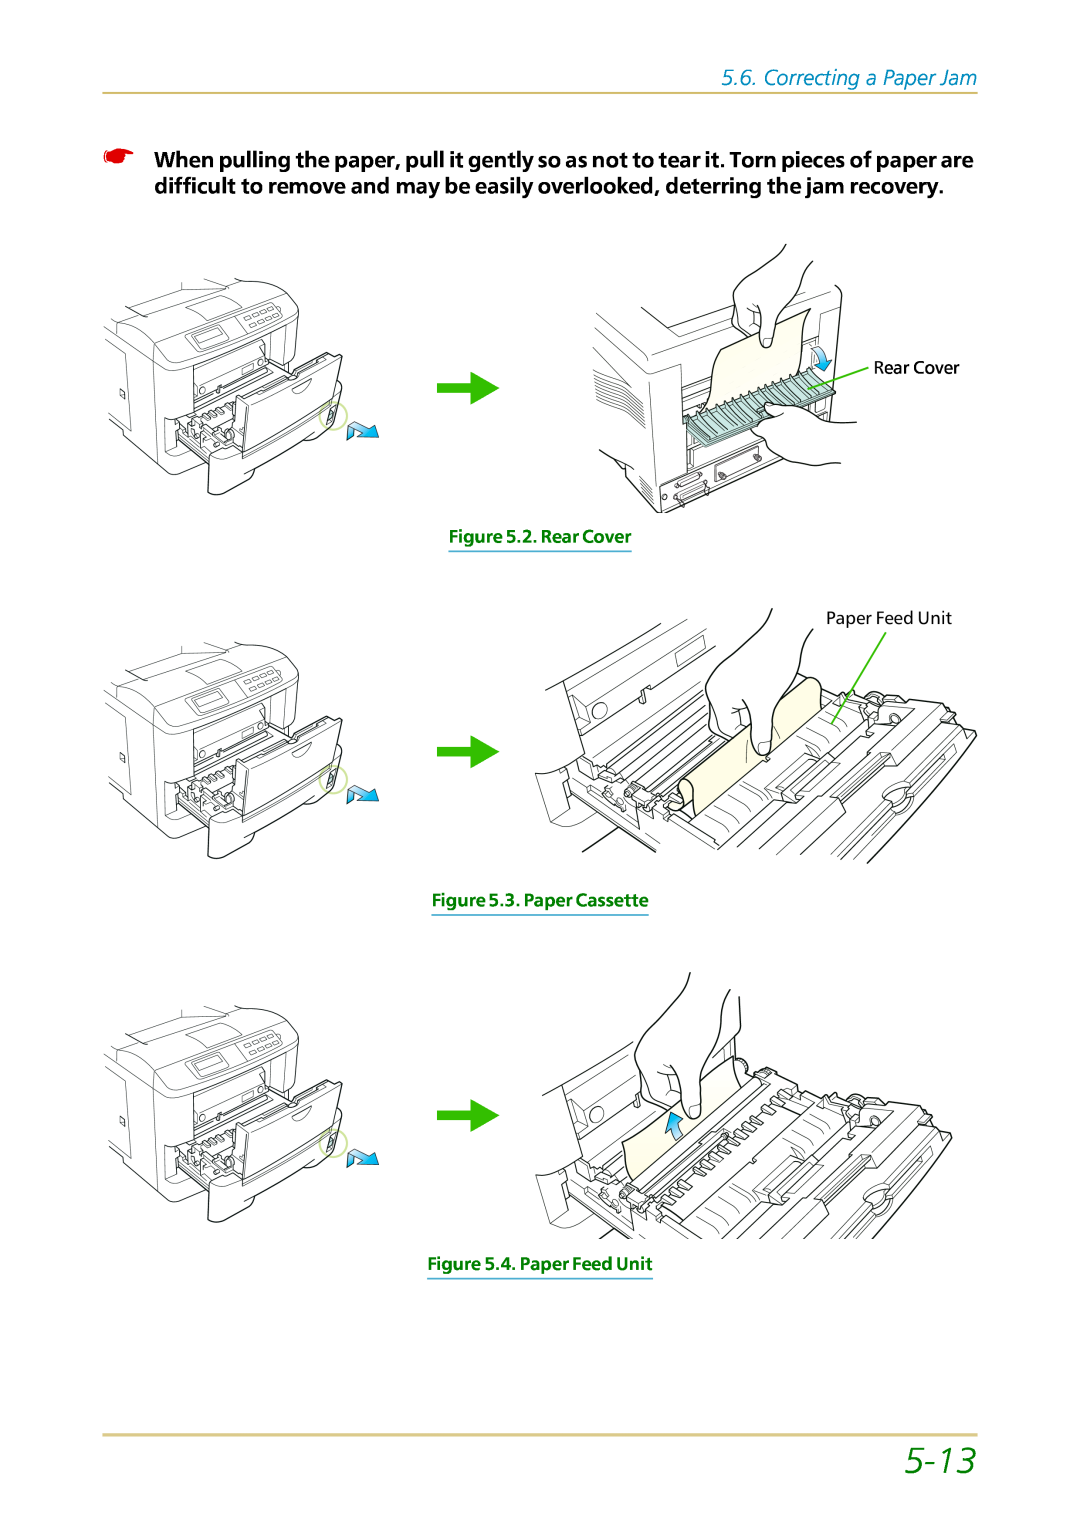 Kyocera FS-1700 user manual 5-13, Correcting a Paper Jam, 2. Rear Cover, 3. Paper Cassette, 4. Paper Feed Unit 